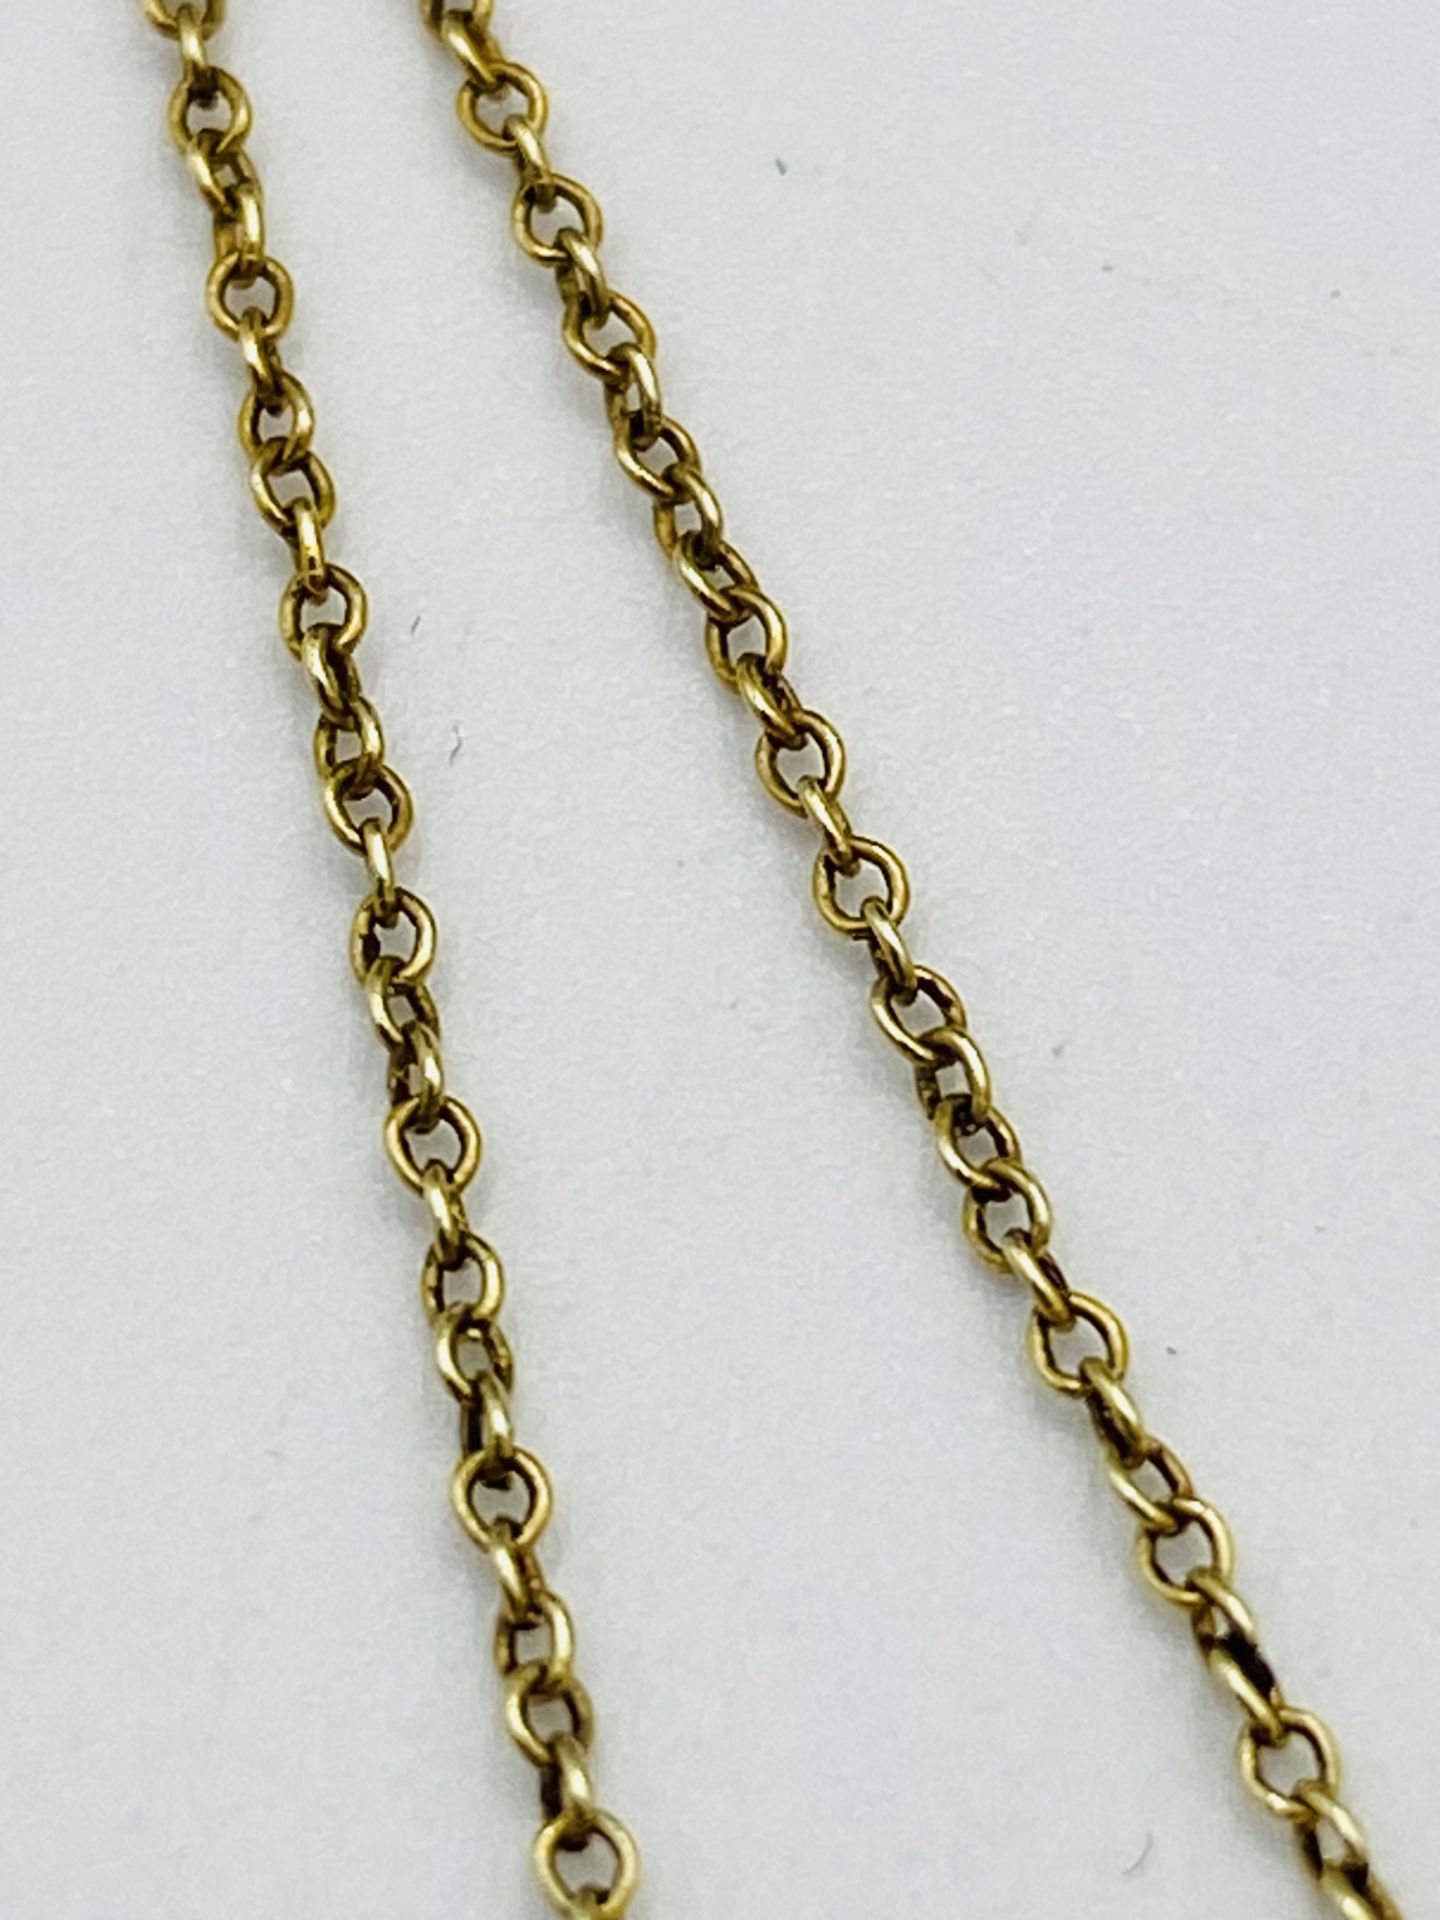 15ct gold pendant necklace - Image 4 of 4